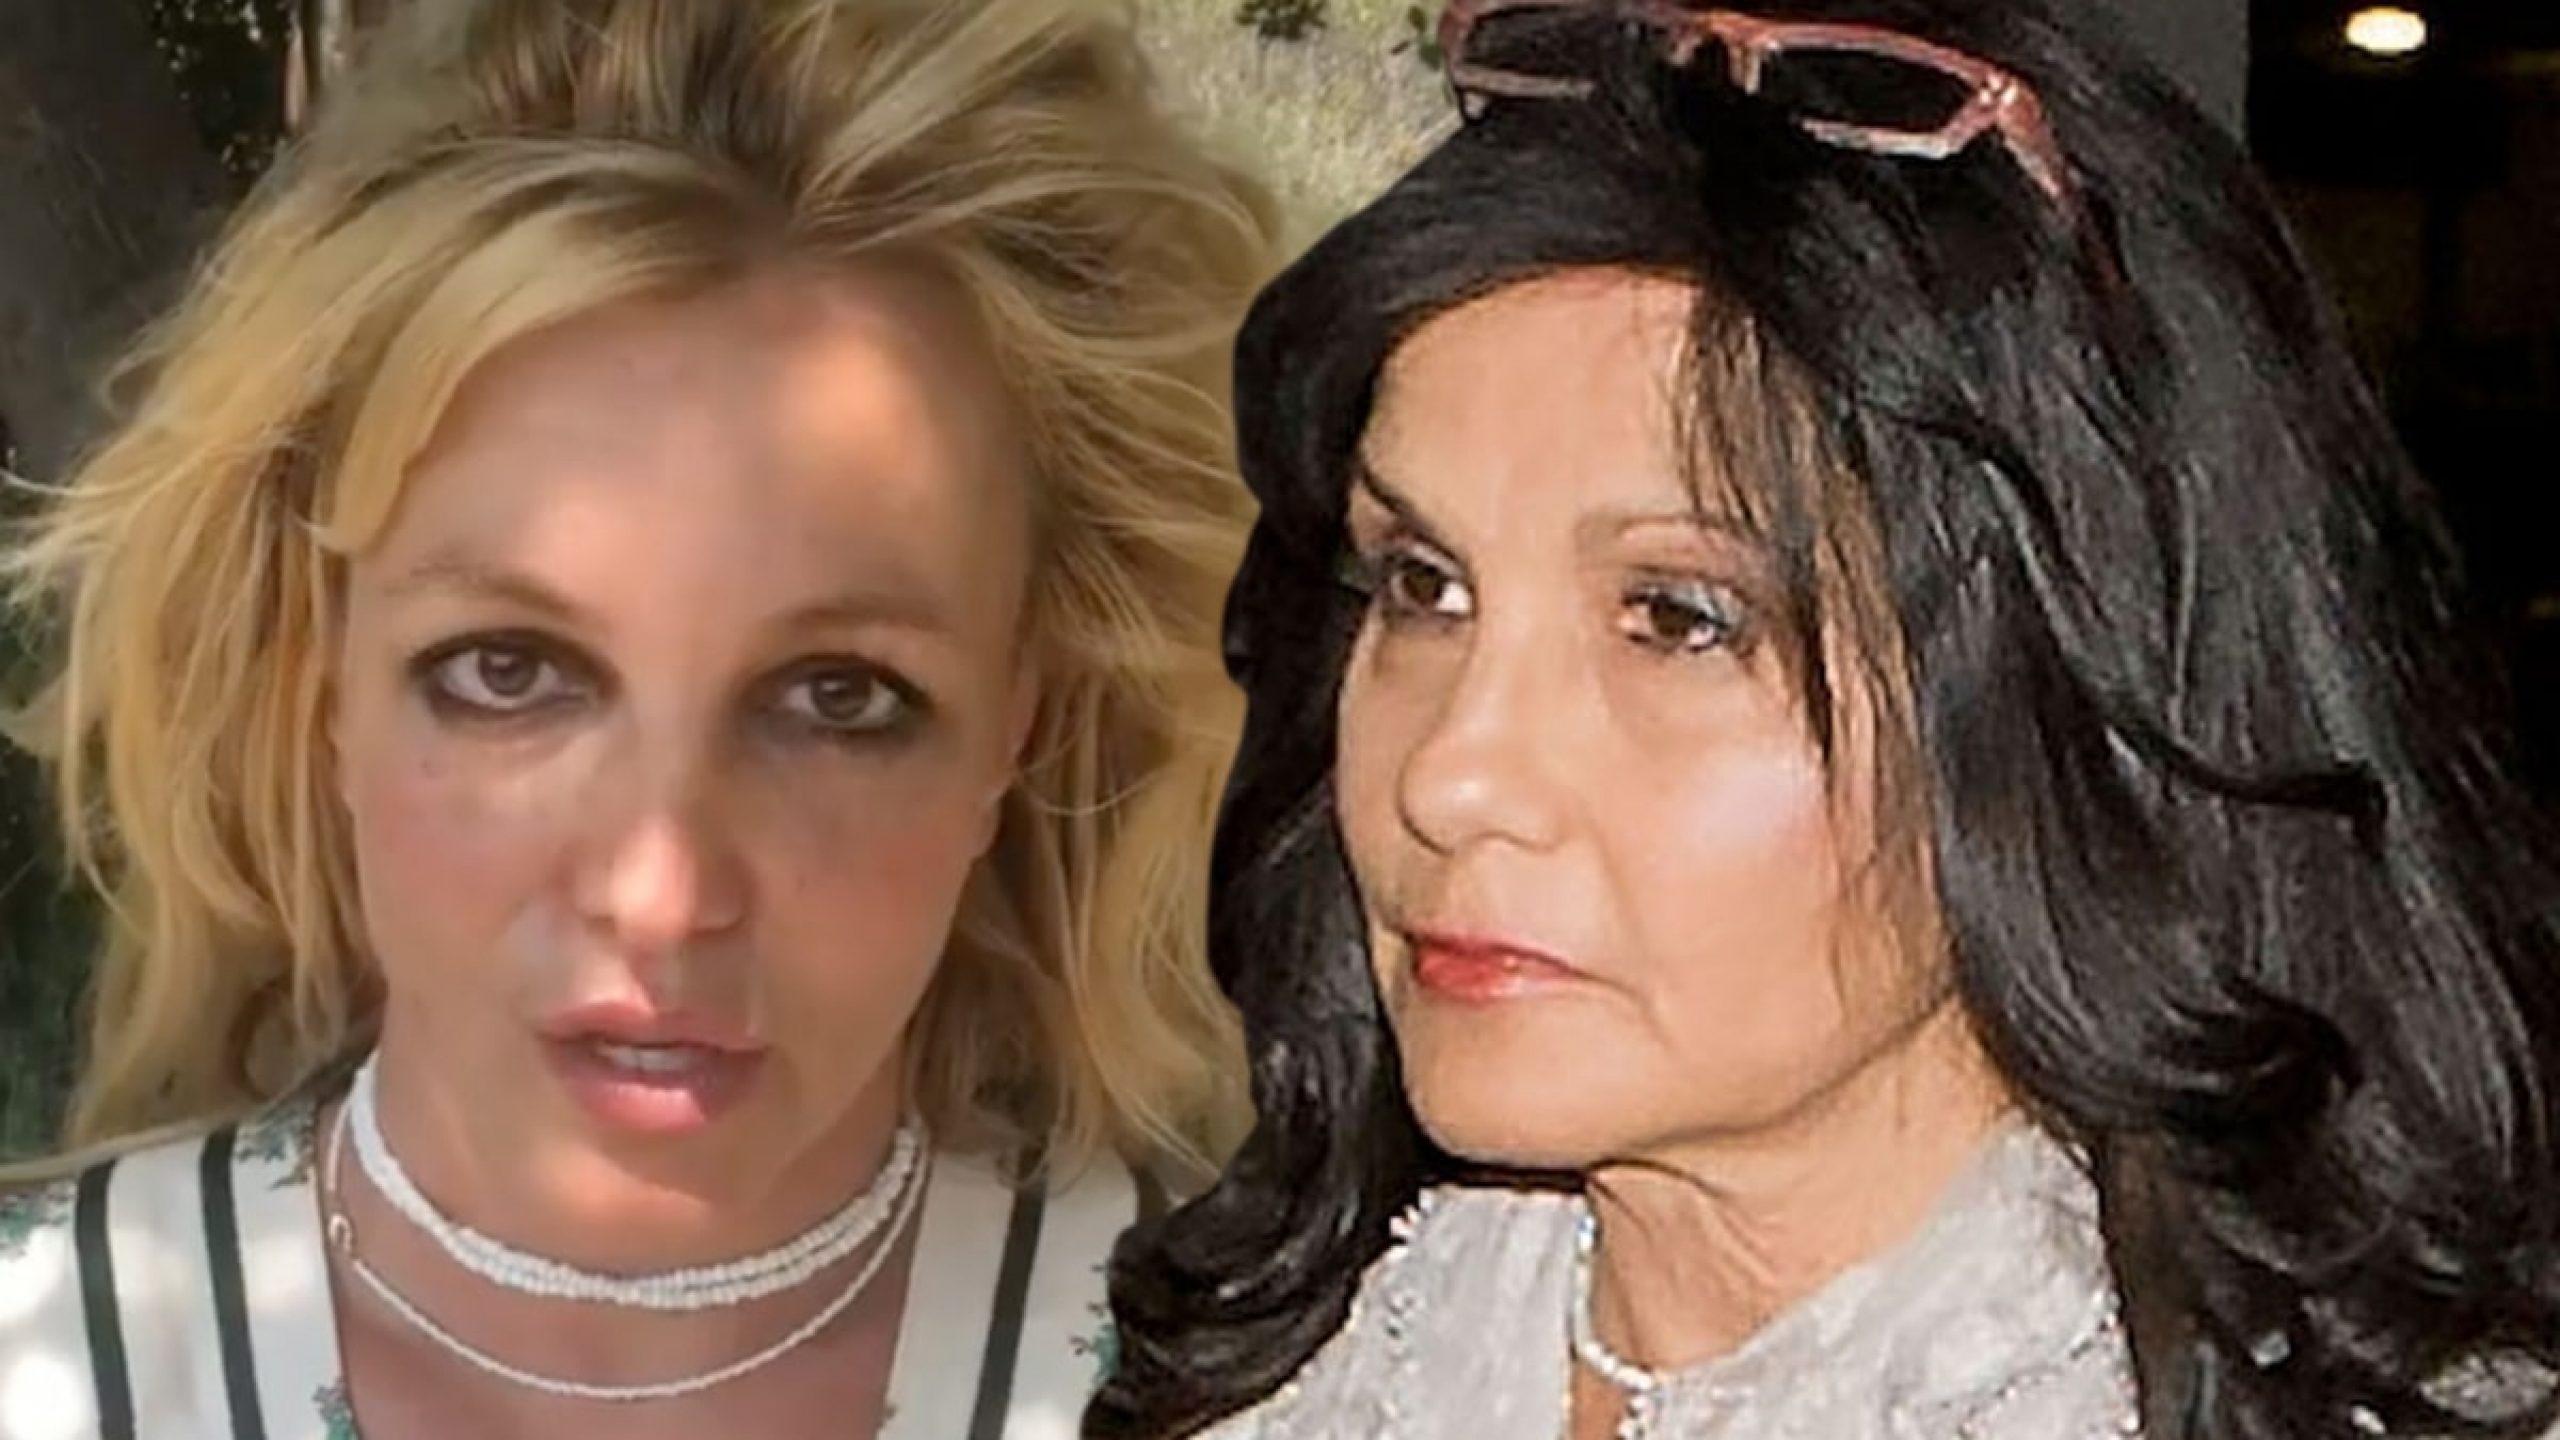 Lynne Spears Asks Judge to Appoint Private Lawyer for Britney to End Conservatorship